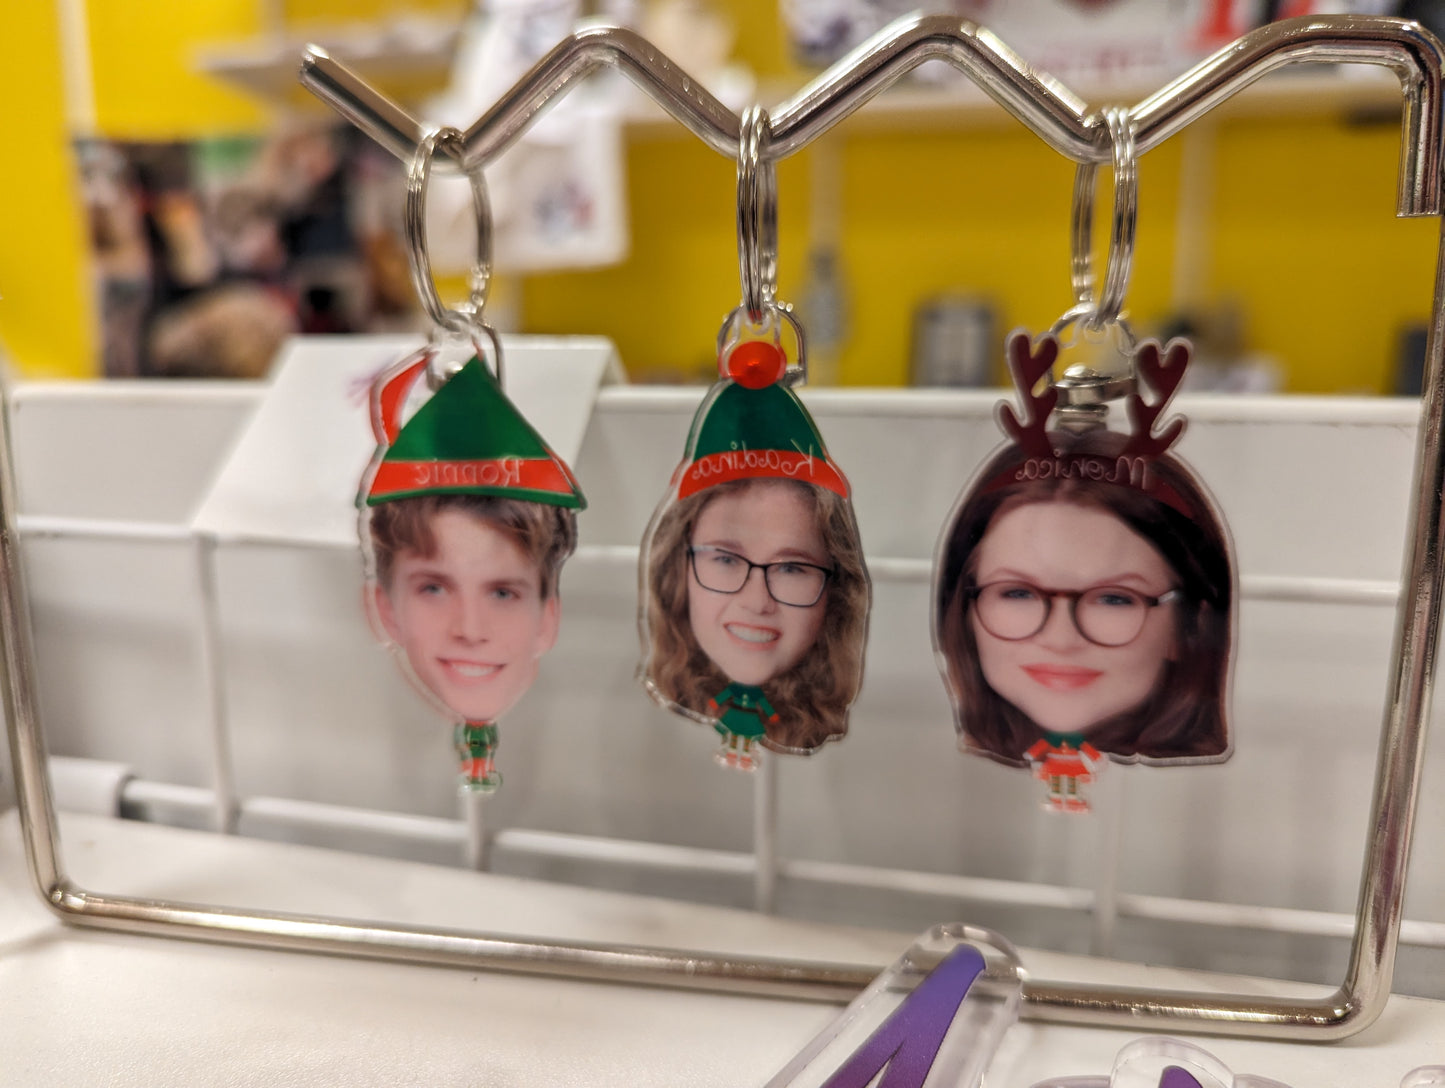 "Christmas" Your Photo - Snow globes, Desk buddies, ornaments and more